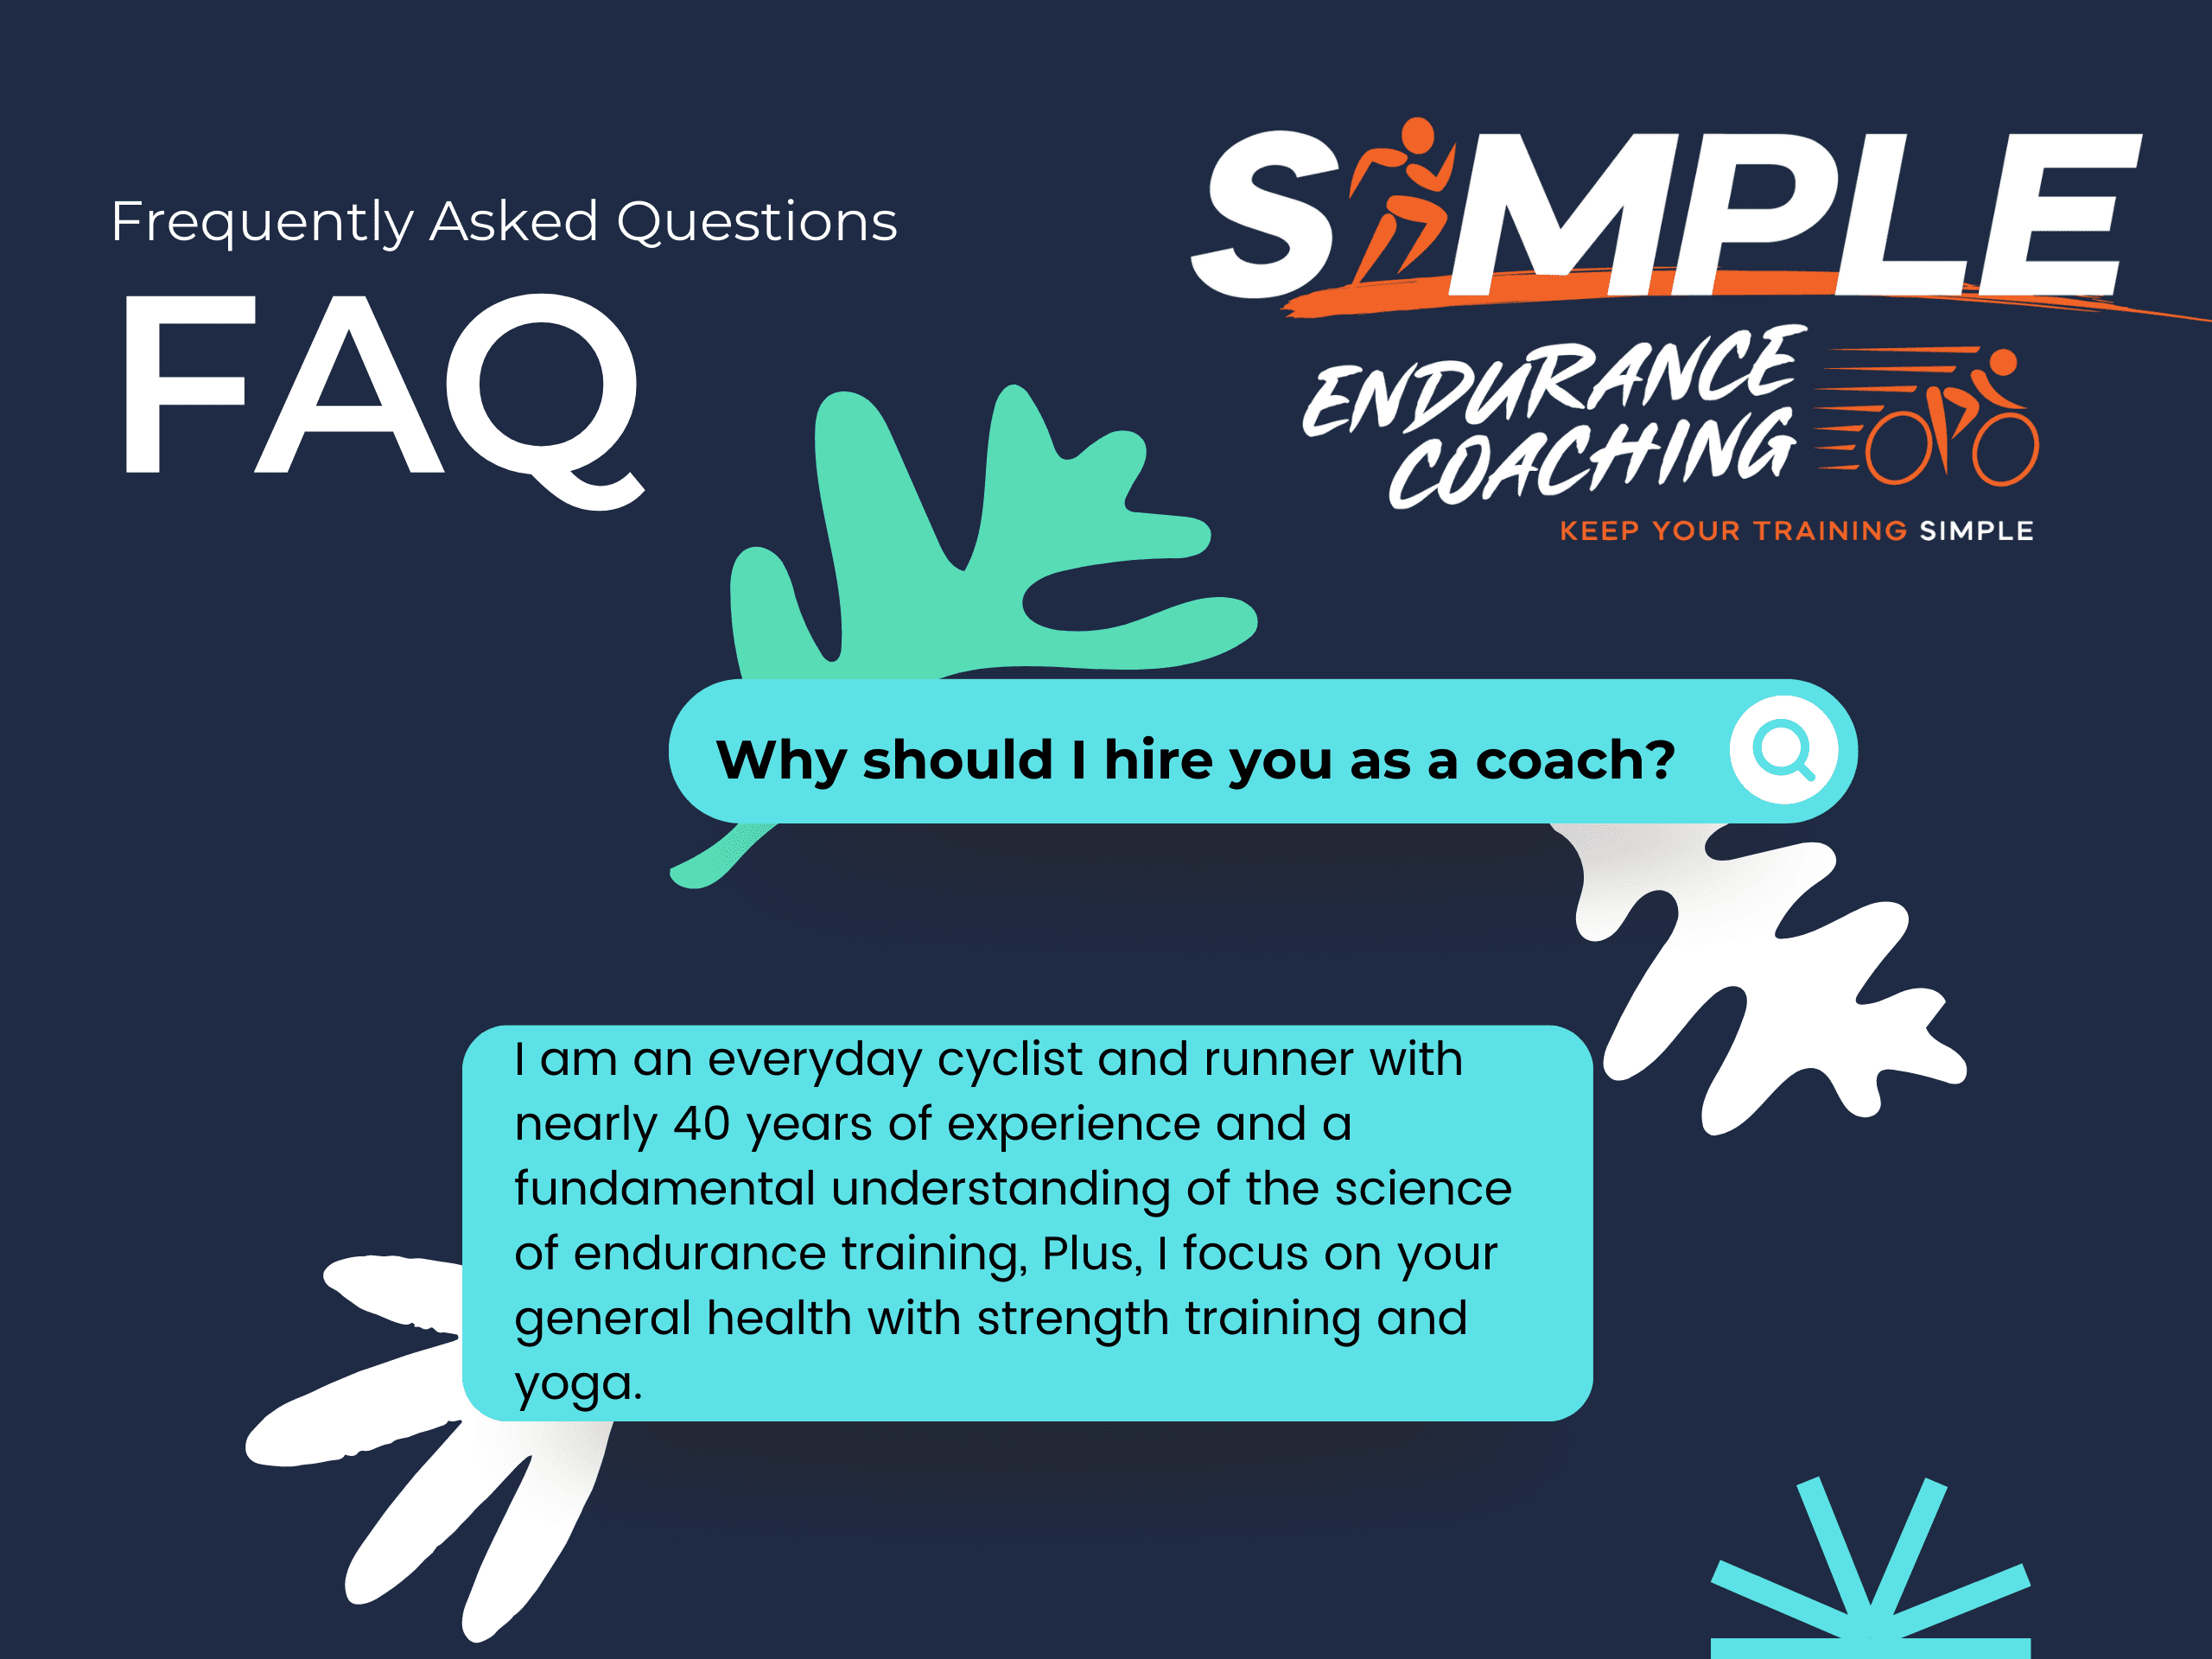 Frequently asked questions about cycling and running coaching